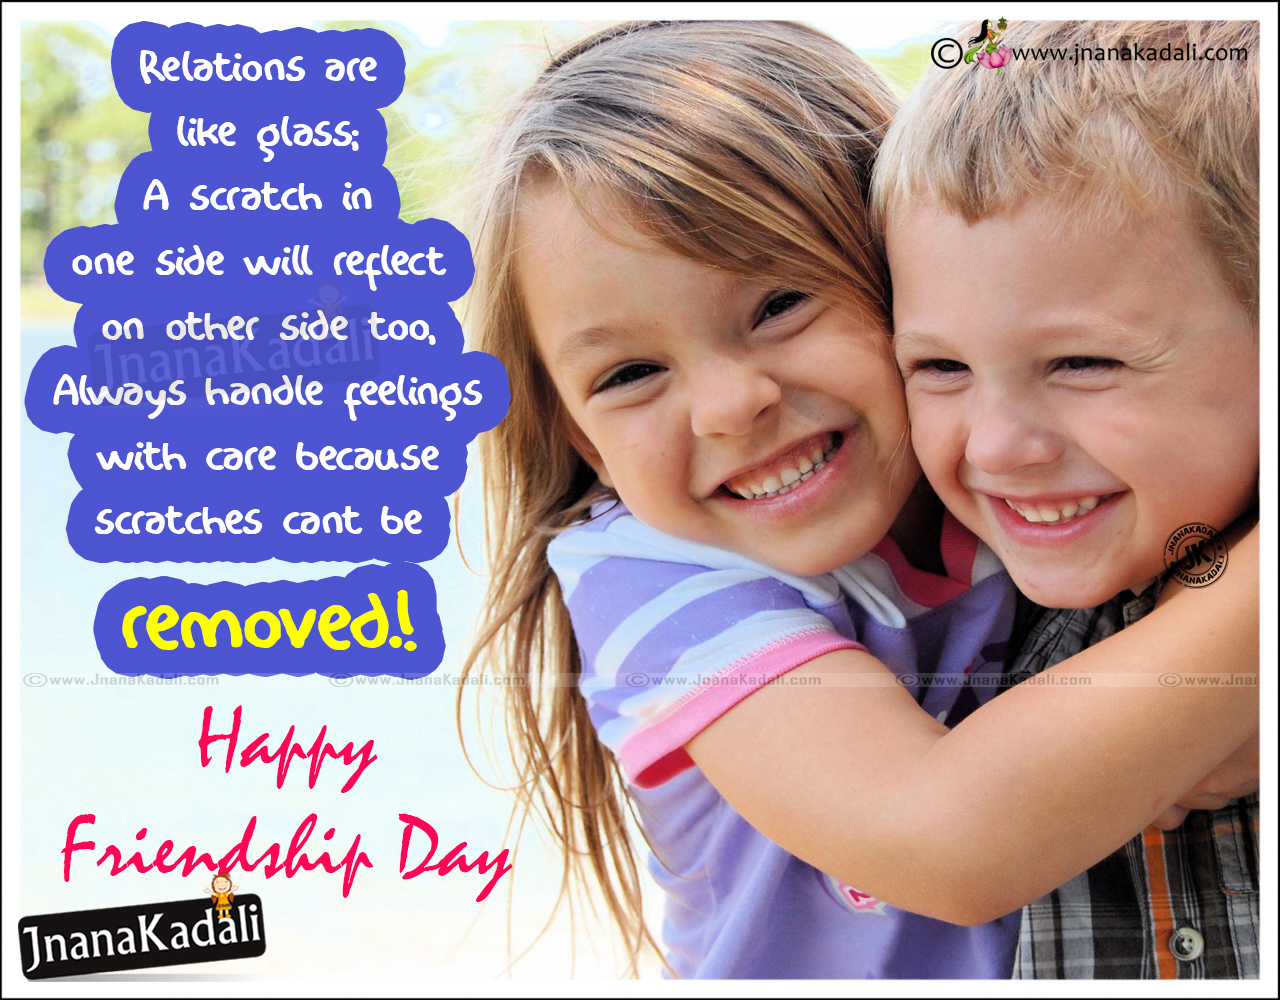 True Friendship Day quotes and Messages Online with children hd ...